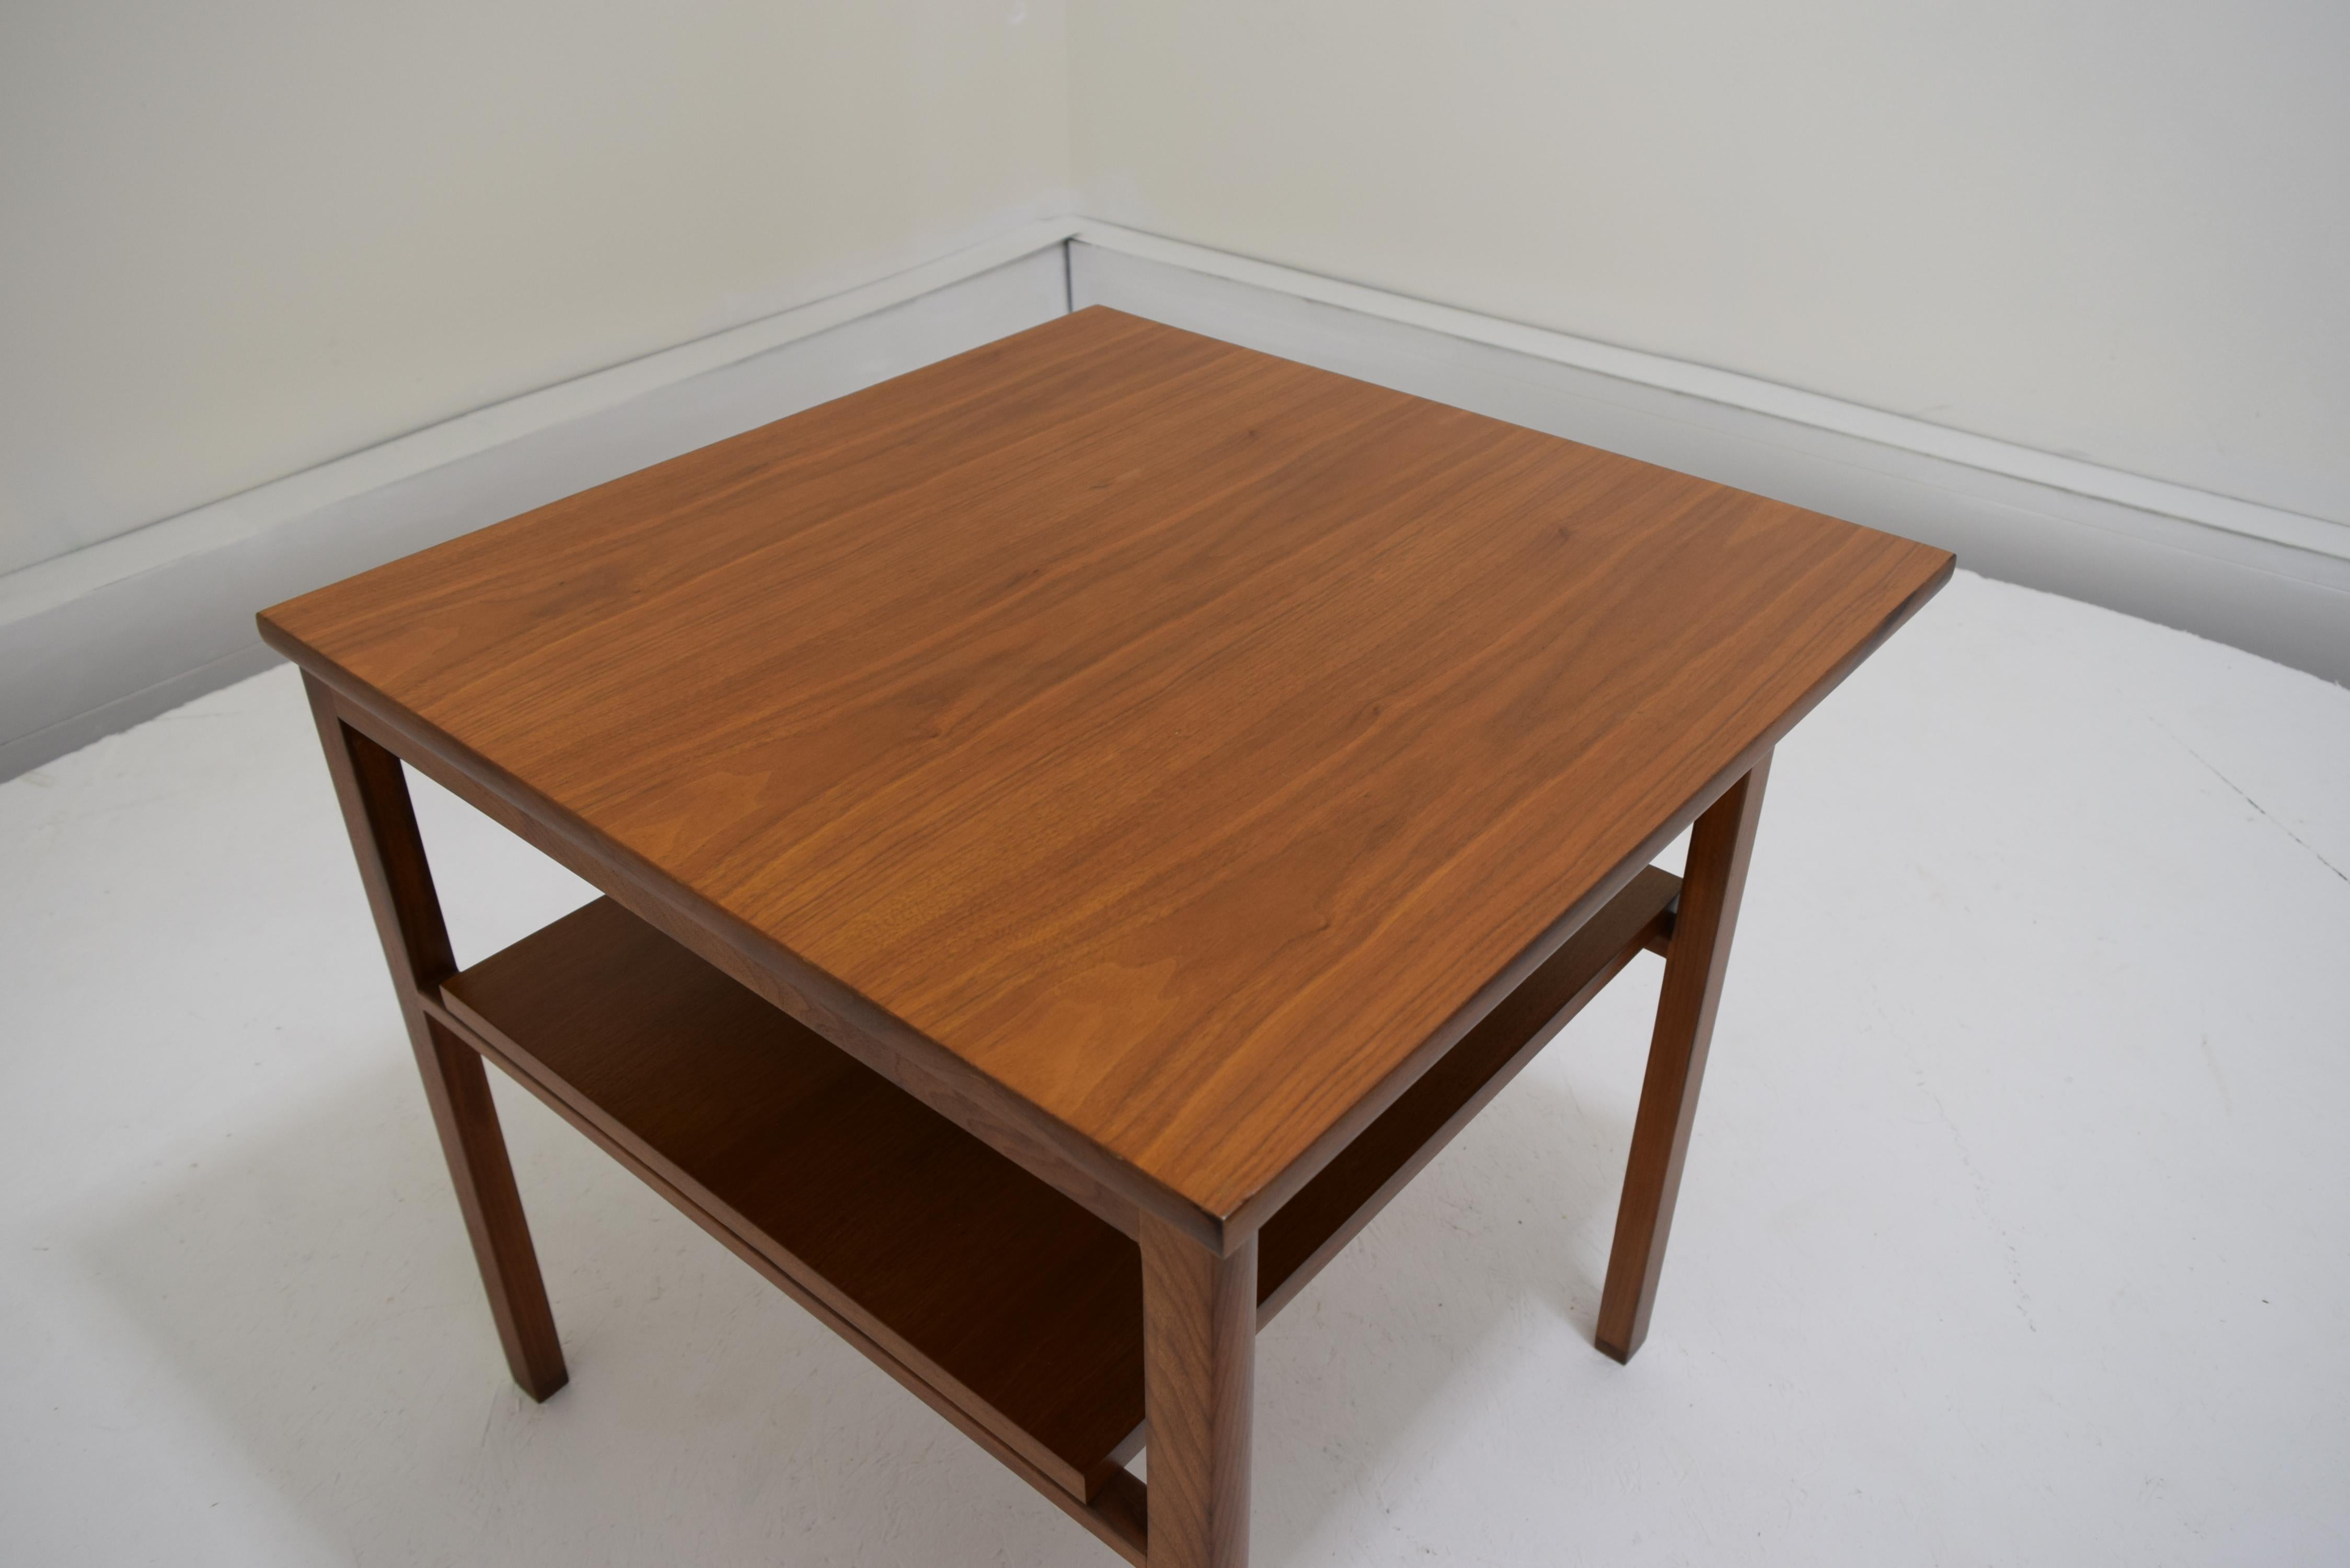 Dunbar, lamp table, Edward Wormley, circa 1955, measures: 27 7/8 square, 26 inch tall.
For use as a lamp table ideal as end table for sofa or hallway console. Signed to underside with brass label. Feet banded in cross-grain walnut.

This table has